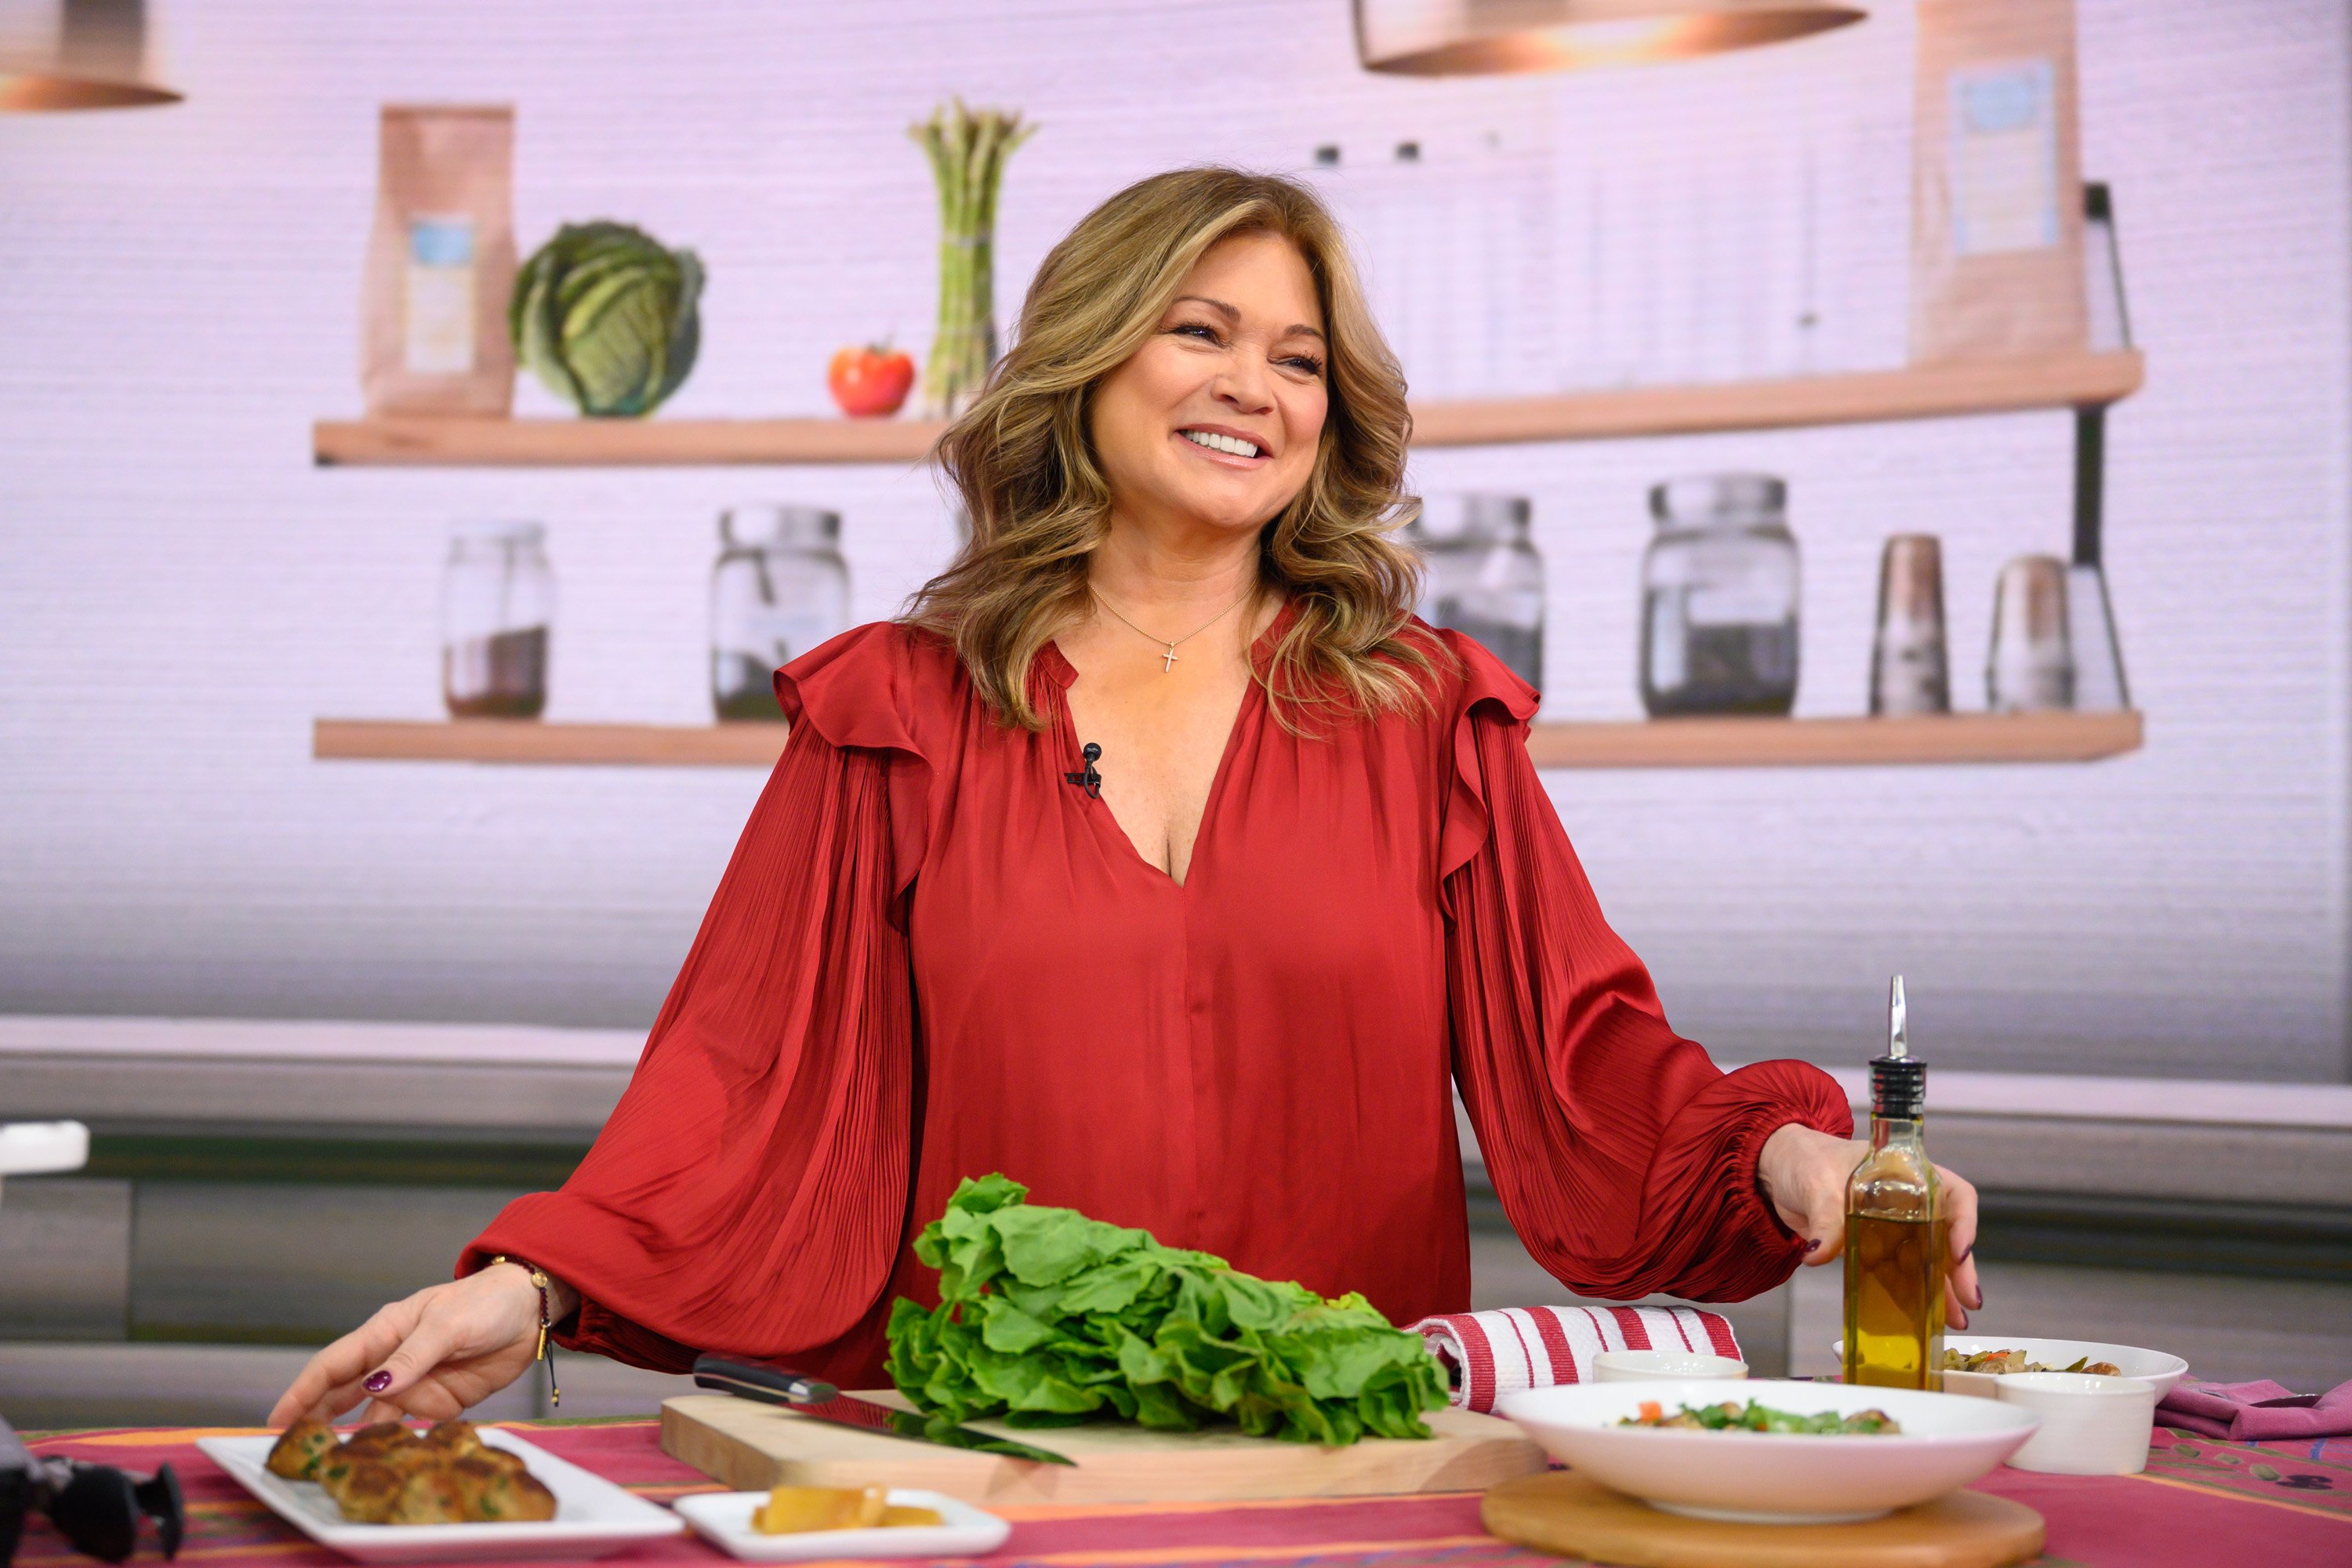 Food Network star Valerie Bertinelli wears a long-sleeved red blouse in this photo.